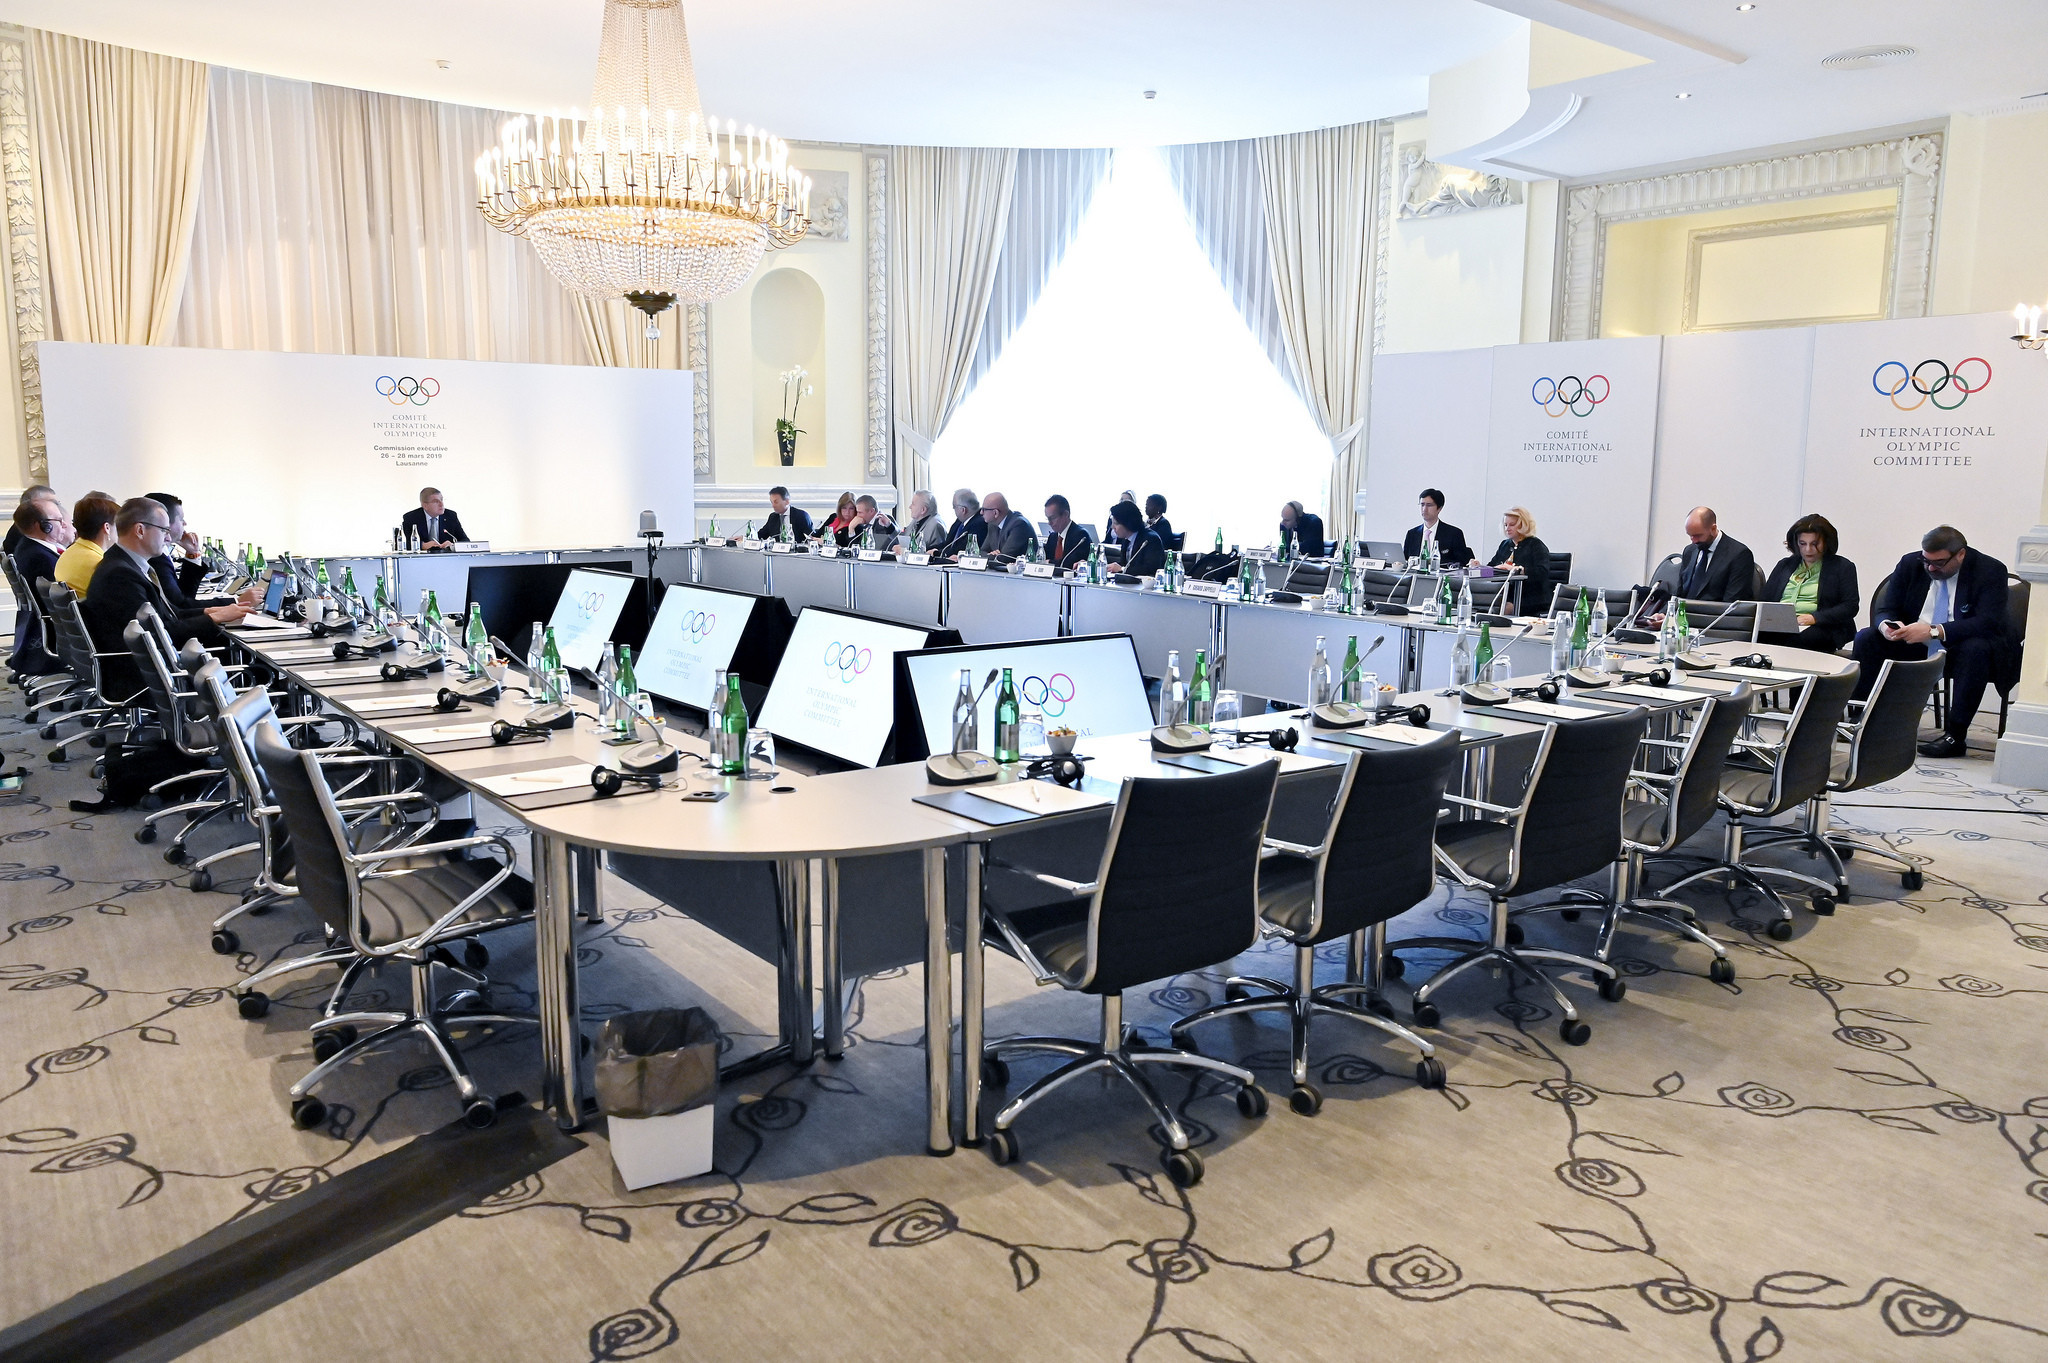 The IOC Executive Board is to receive an interim report tomorrow from the committee leading an inquiry into AIBA, which is expected to give some indication as to whether they will be allowed to organise boxing at Tokyo 2020 ©IOC